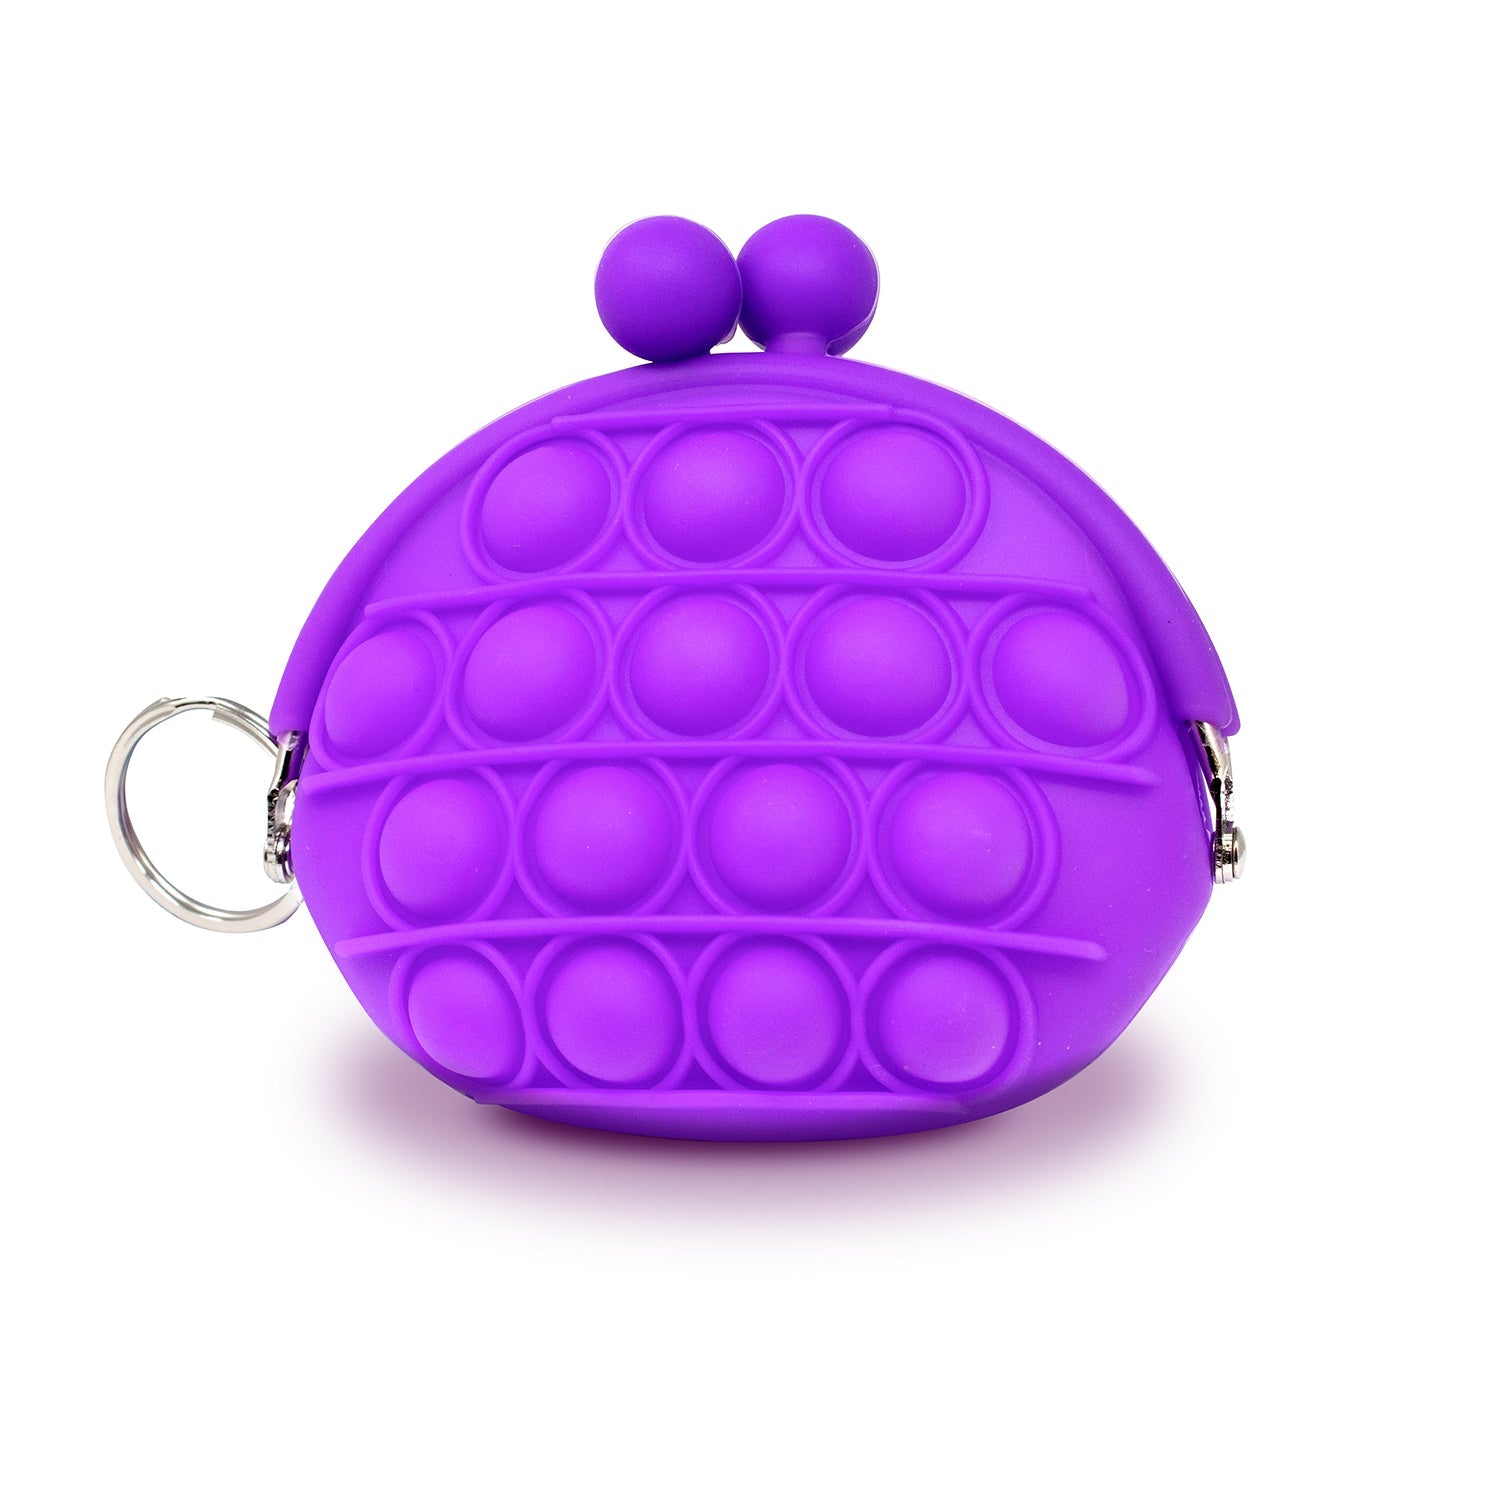 Mini Bubble Pop Clasp Purse, purple. This fidget toy coin purse uses high quality silicone rubber materials. Not just a toy, it is also practical coin purse that not only can store small items, but also a sensory toy. Just pressing the bubble down makes a big, crisp popping sound! Fashionable and super cute design for kids, it can be used as a fashion accessory or coin purse you can store change, tissues, snacks, lipstick, keys and more inside.